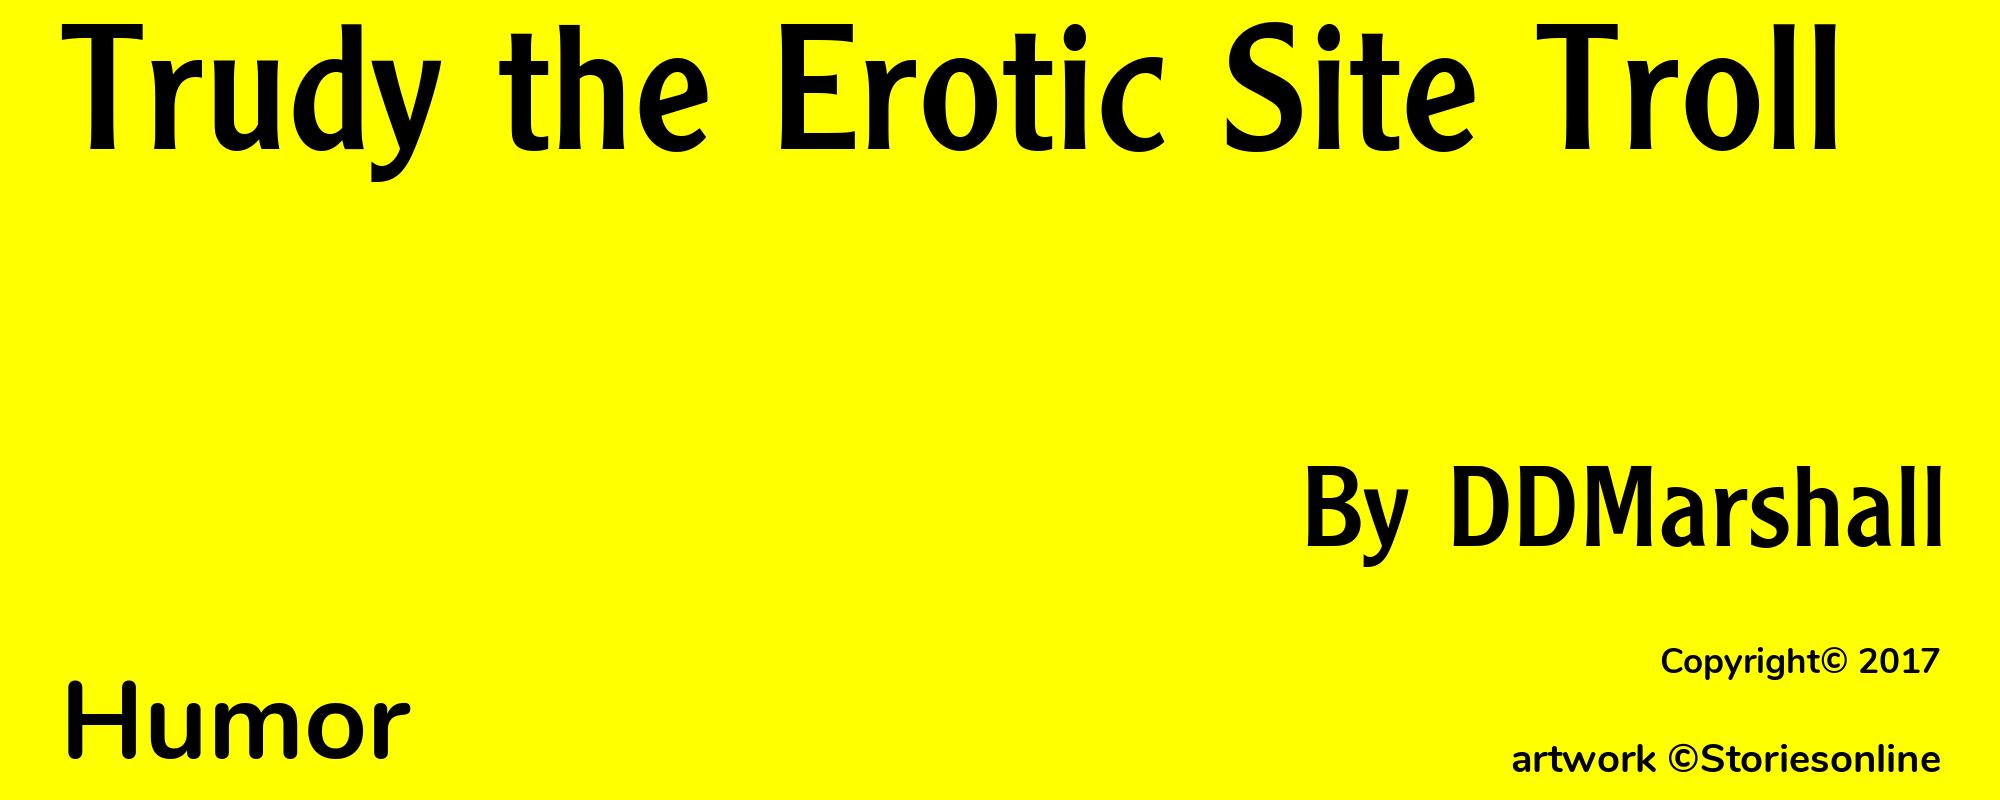 Trudy the Erotic Site Troll - Cover